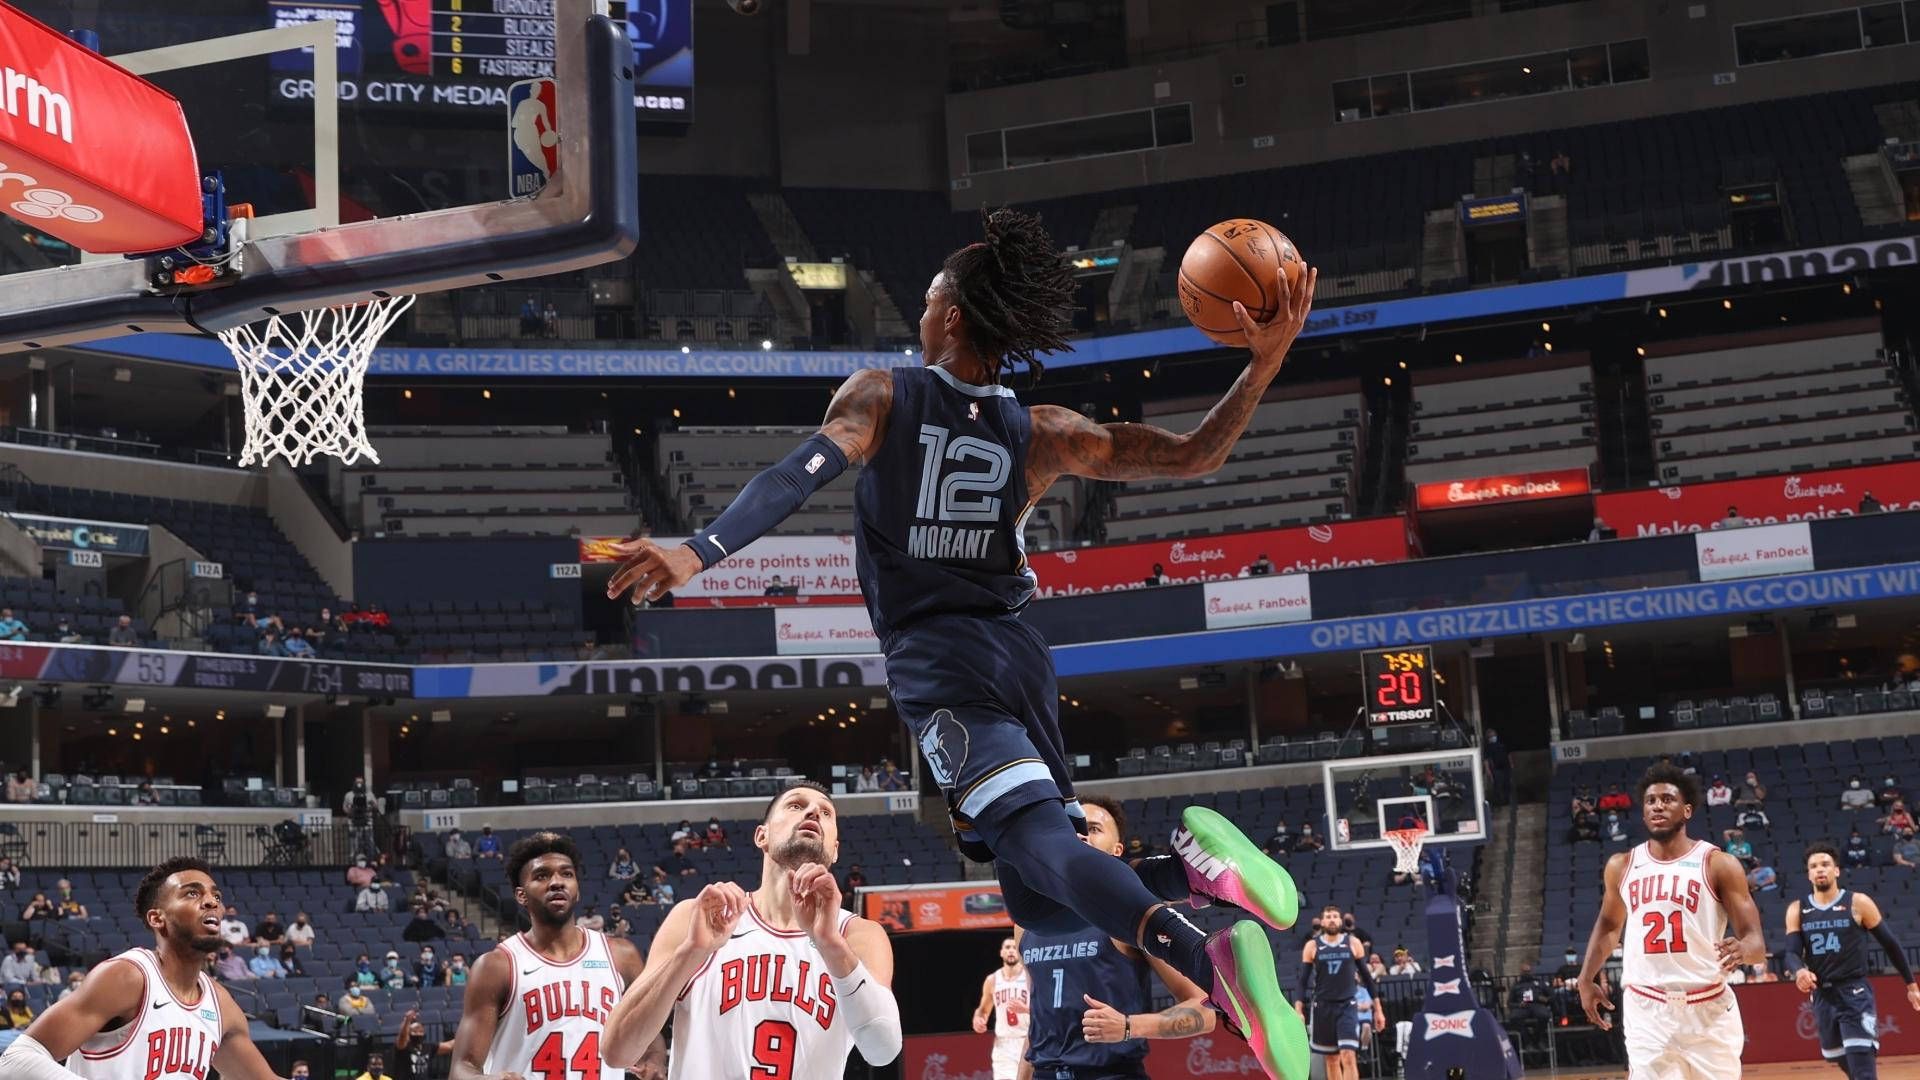 Ja Morant had 27 points, 10 assists and 10 rebounds in the Grizzlies' win over the Bulls. - Ja Morant